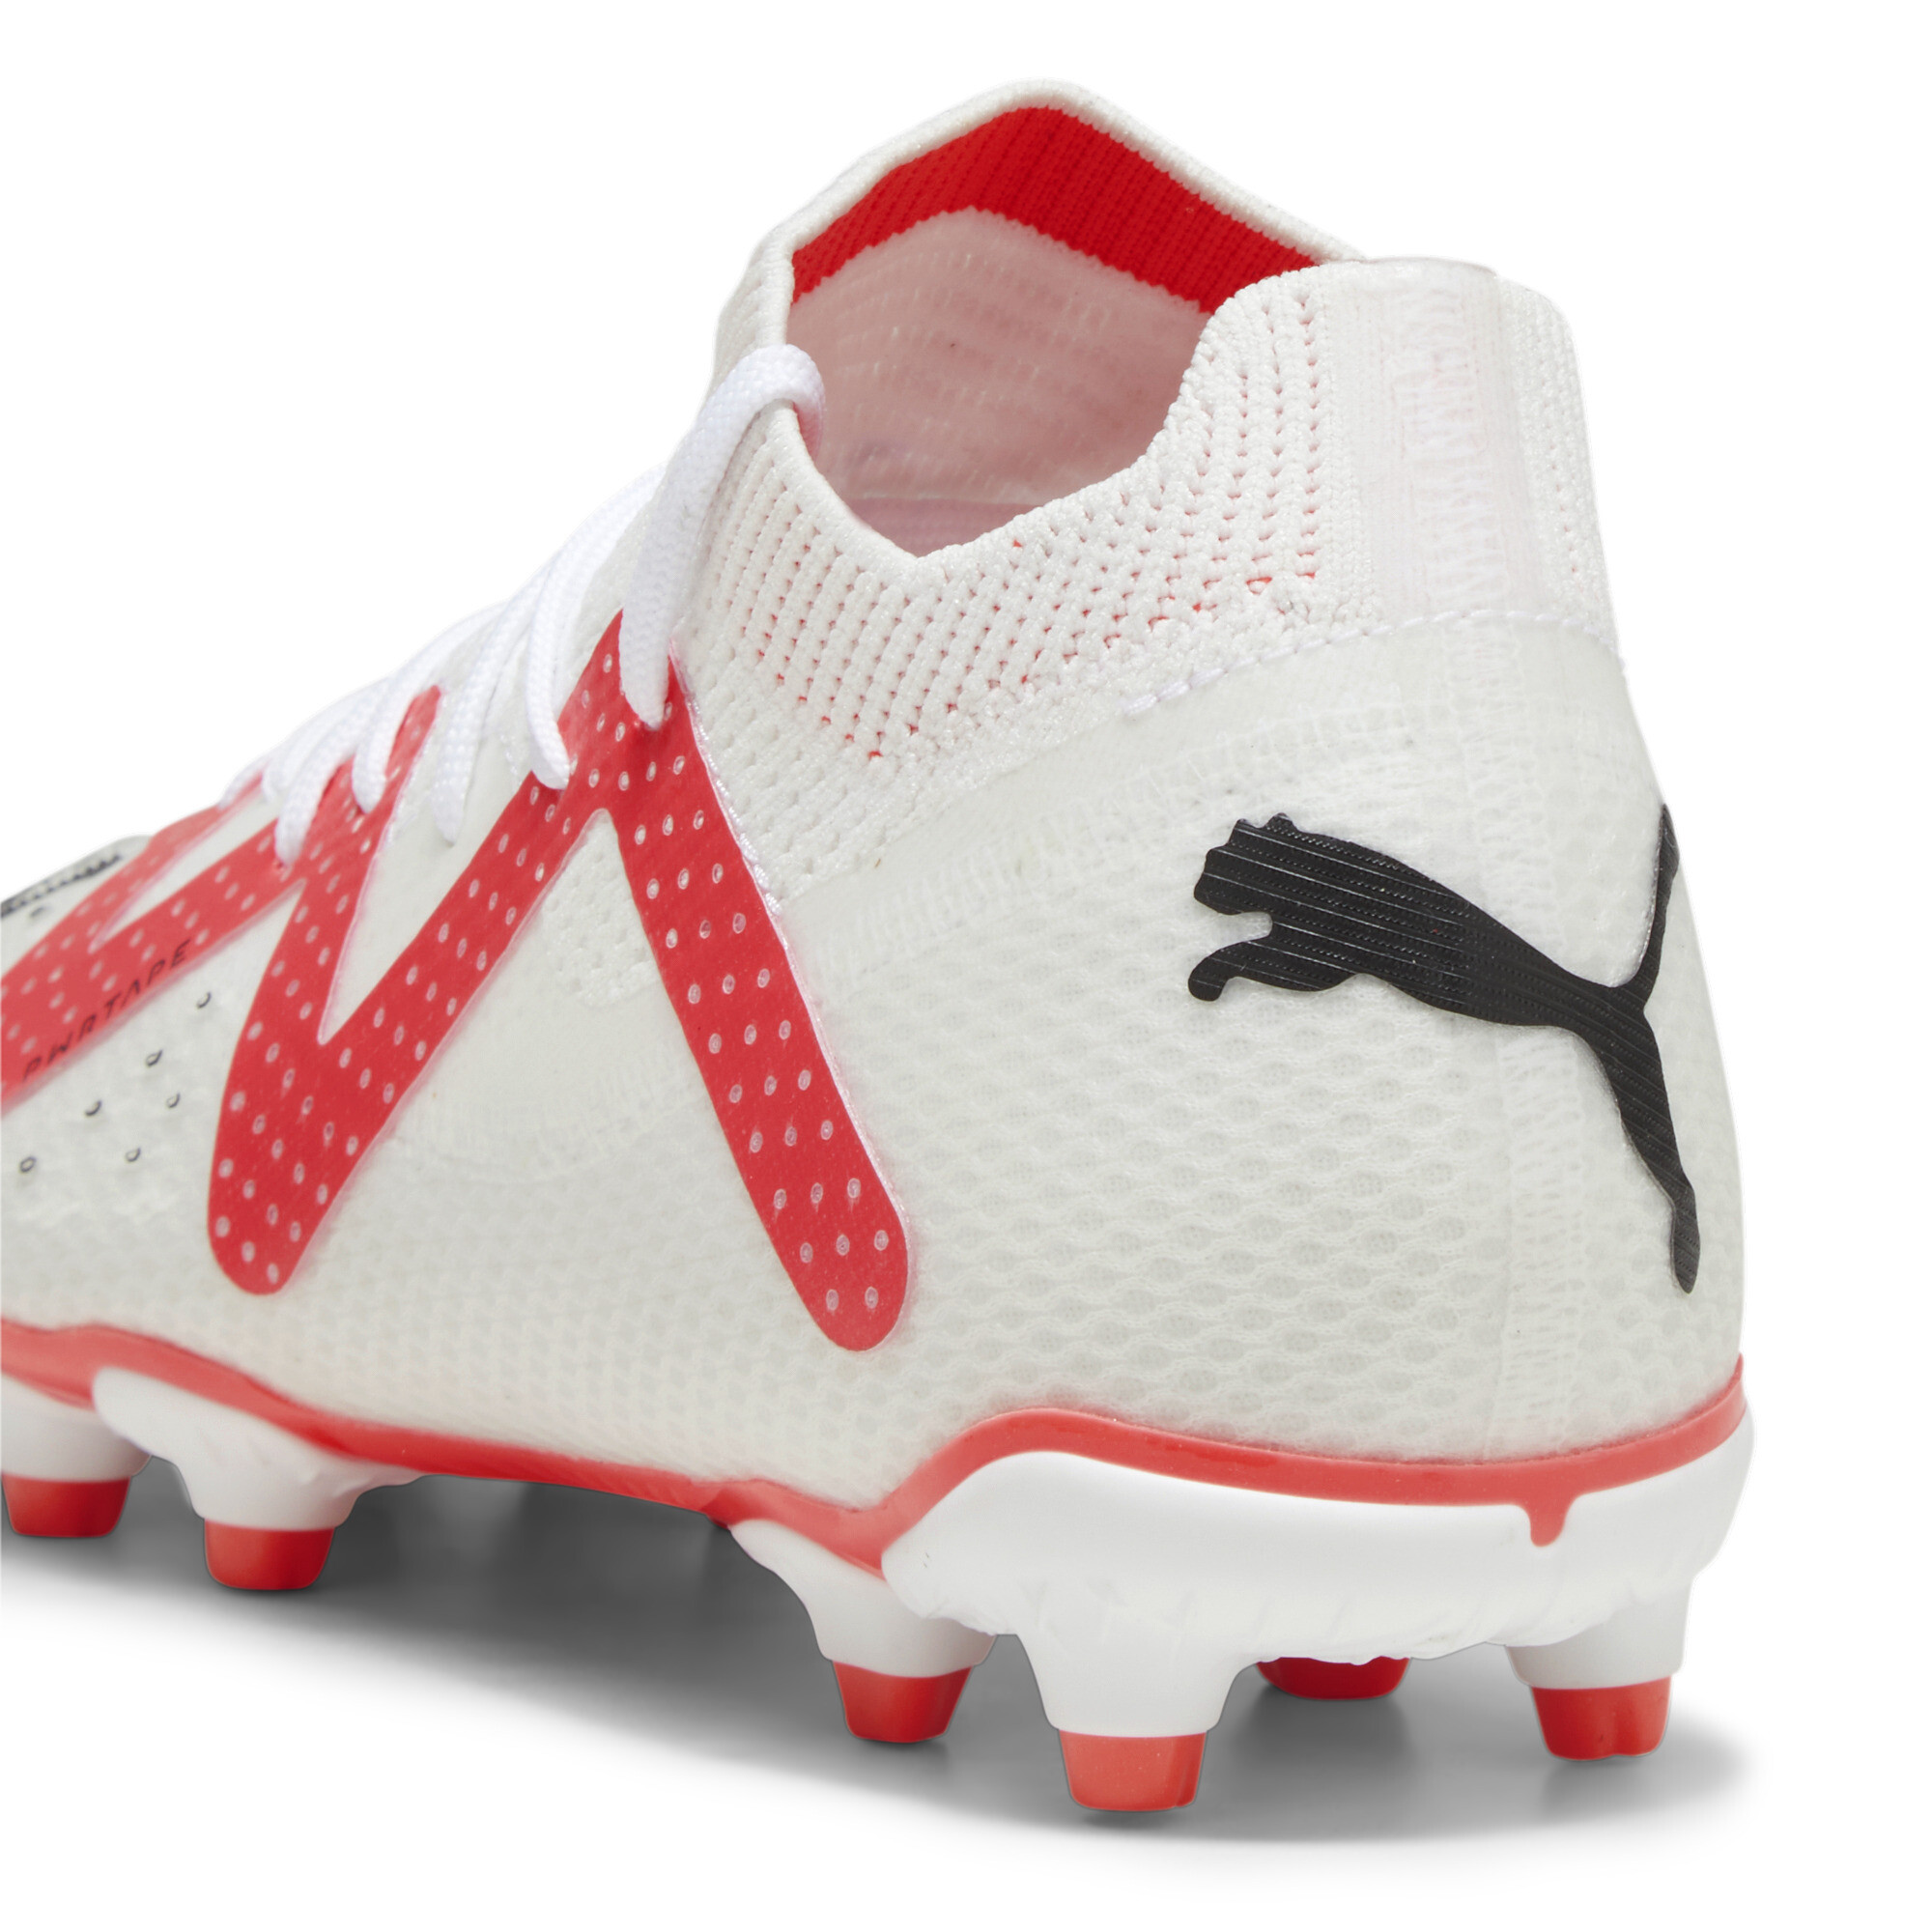 Puma FUTURE PRO FG/AG Youth Football Boots, White, Size 34.5, Shoes